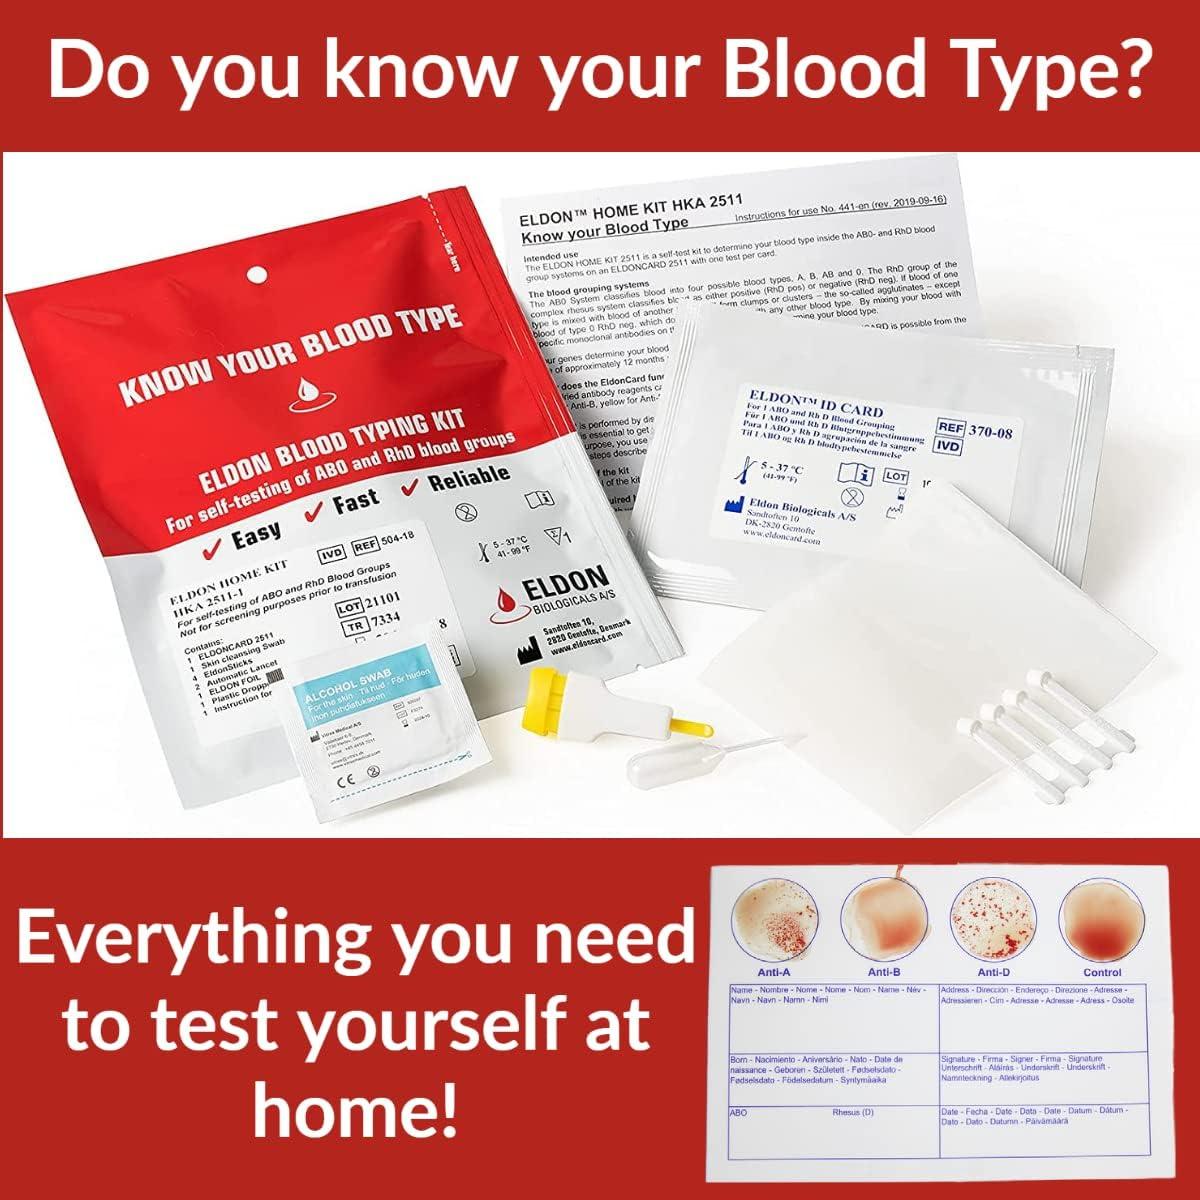 Eldoncard Blood Kit 1 Test Know Your Blood Type Instant Home Testing Kit A O B Negative and Positive Blood Tested